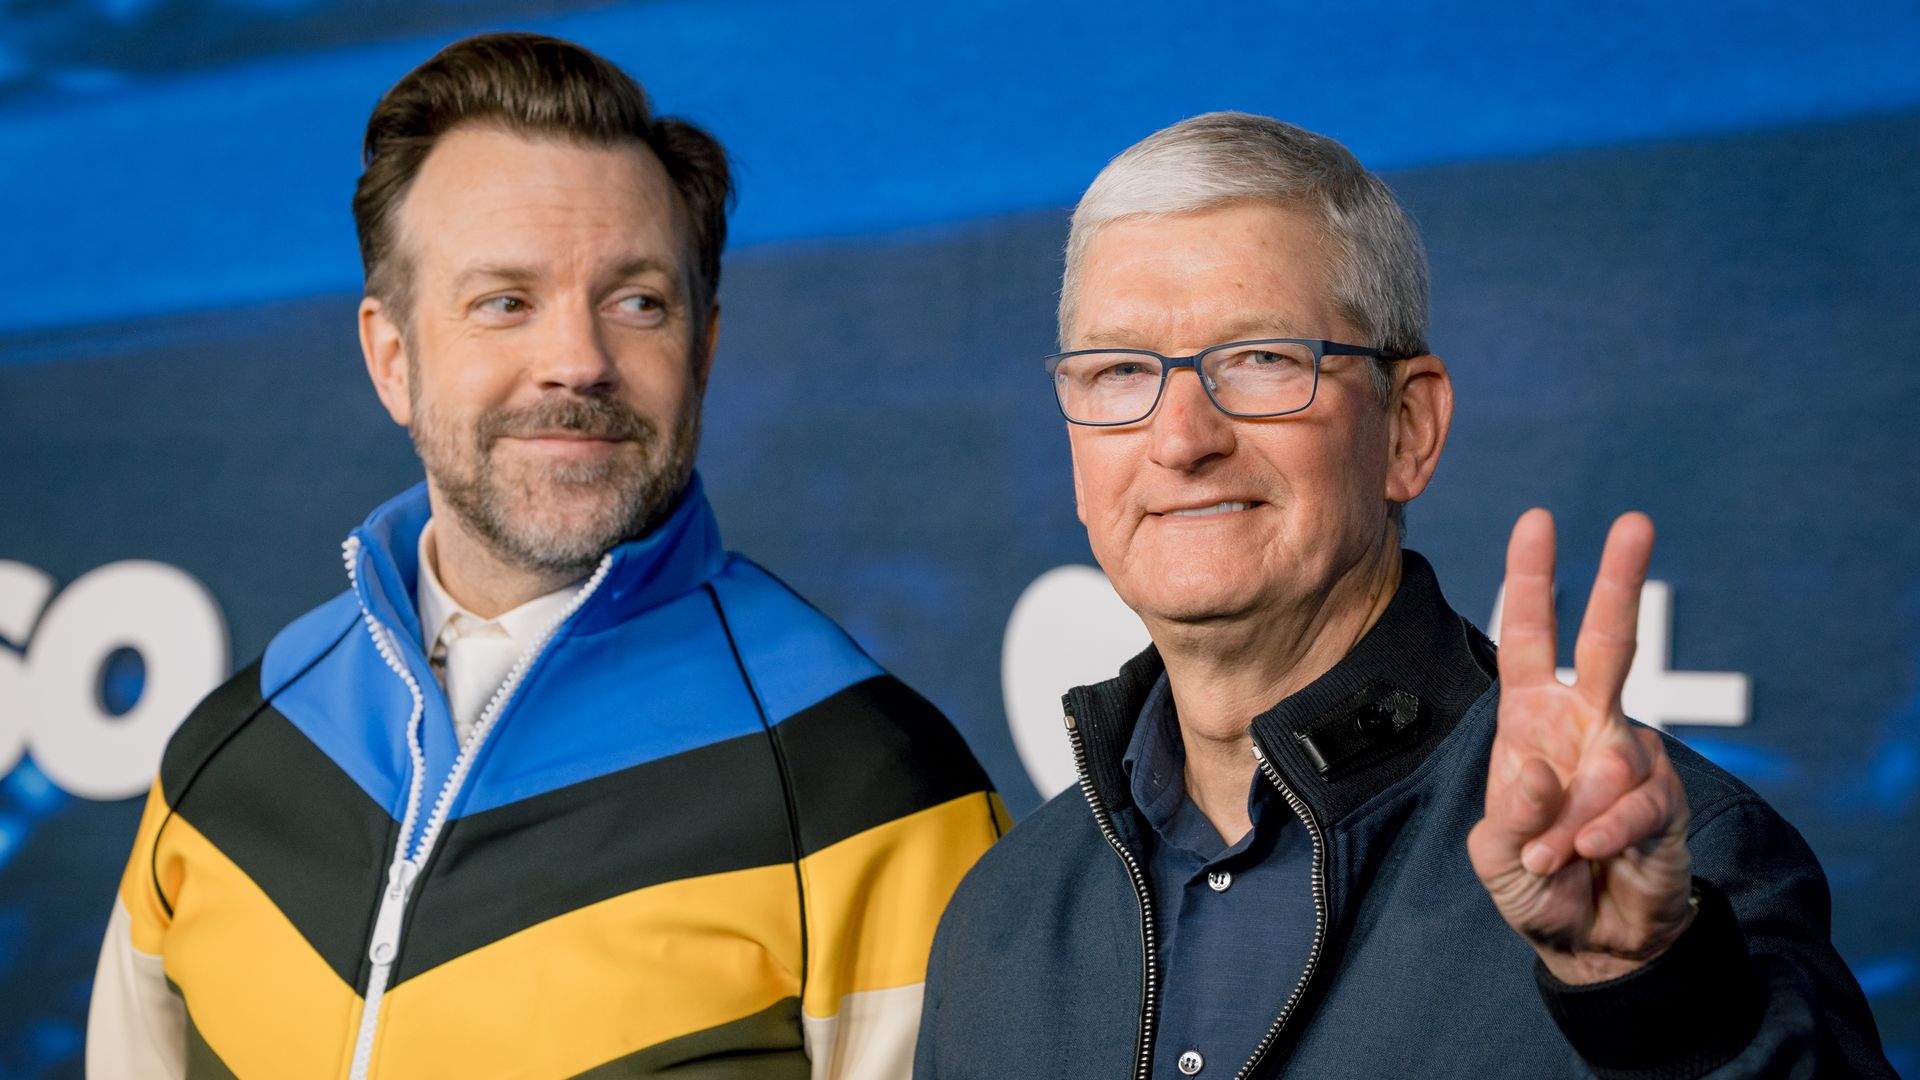 Apple CEO Tim Cook makes a peace sign with his left hand standing next to Jason Sudeilkis